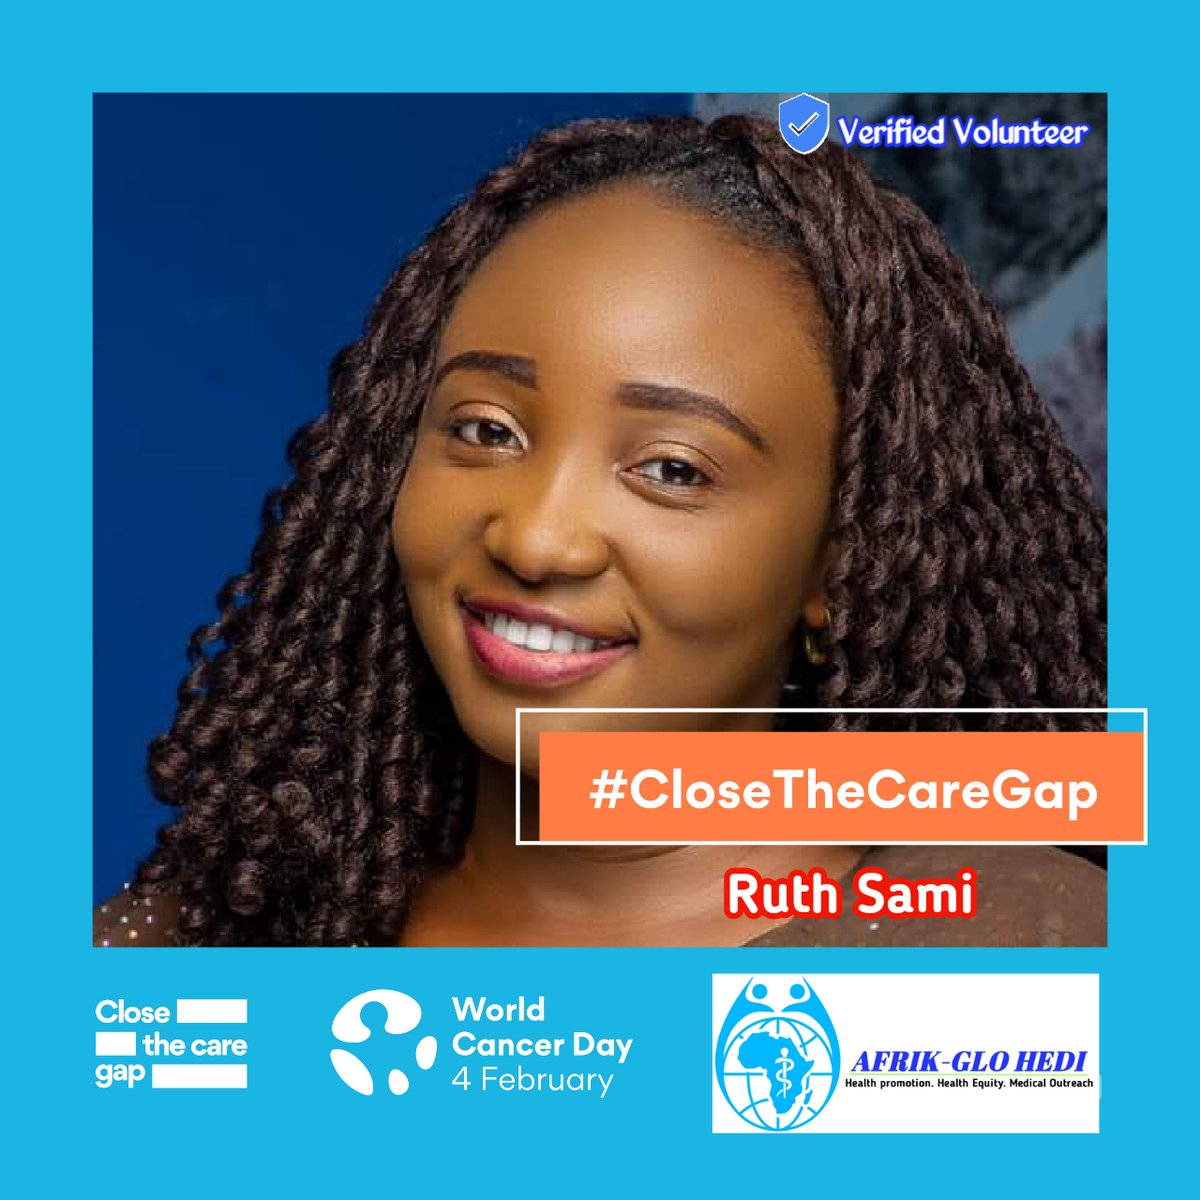 Many thanks to all our Volunteers who stand with us, Afrik-Glo Health Equity and Development Initiative and UICC - Union for International Cancer Control to advocate #HealthEquity for #CancerCare. 
Together, we can #ClosetheCancerGap... instagram.com/p/CZjzNevtbX3/…